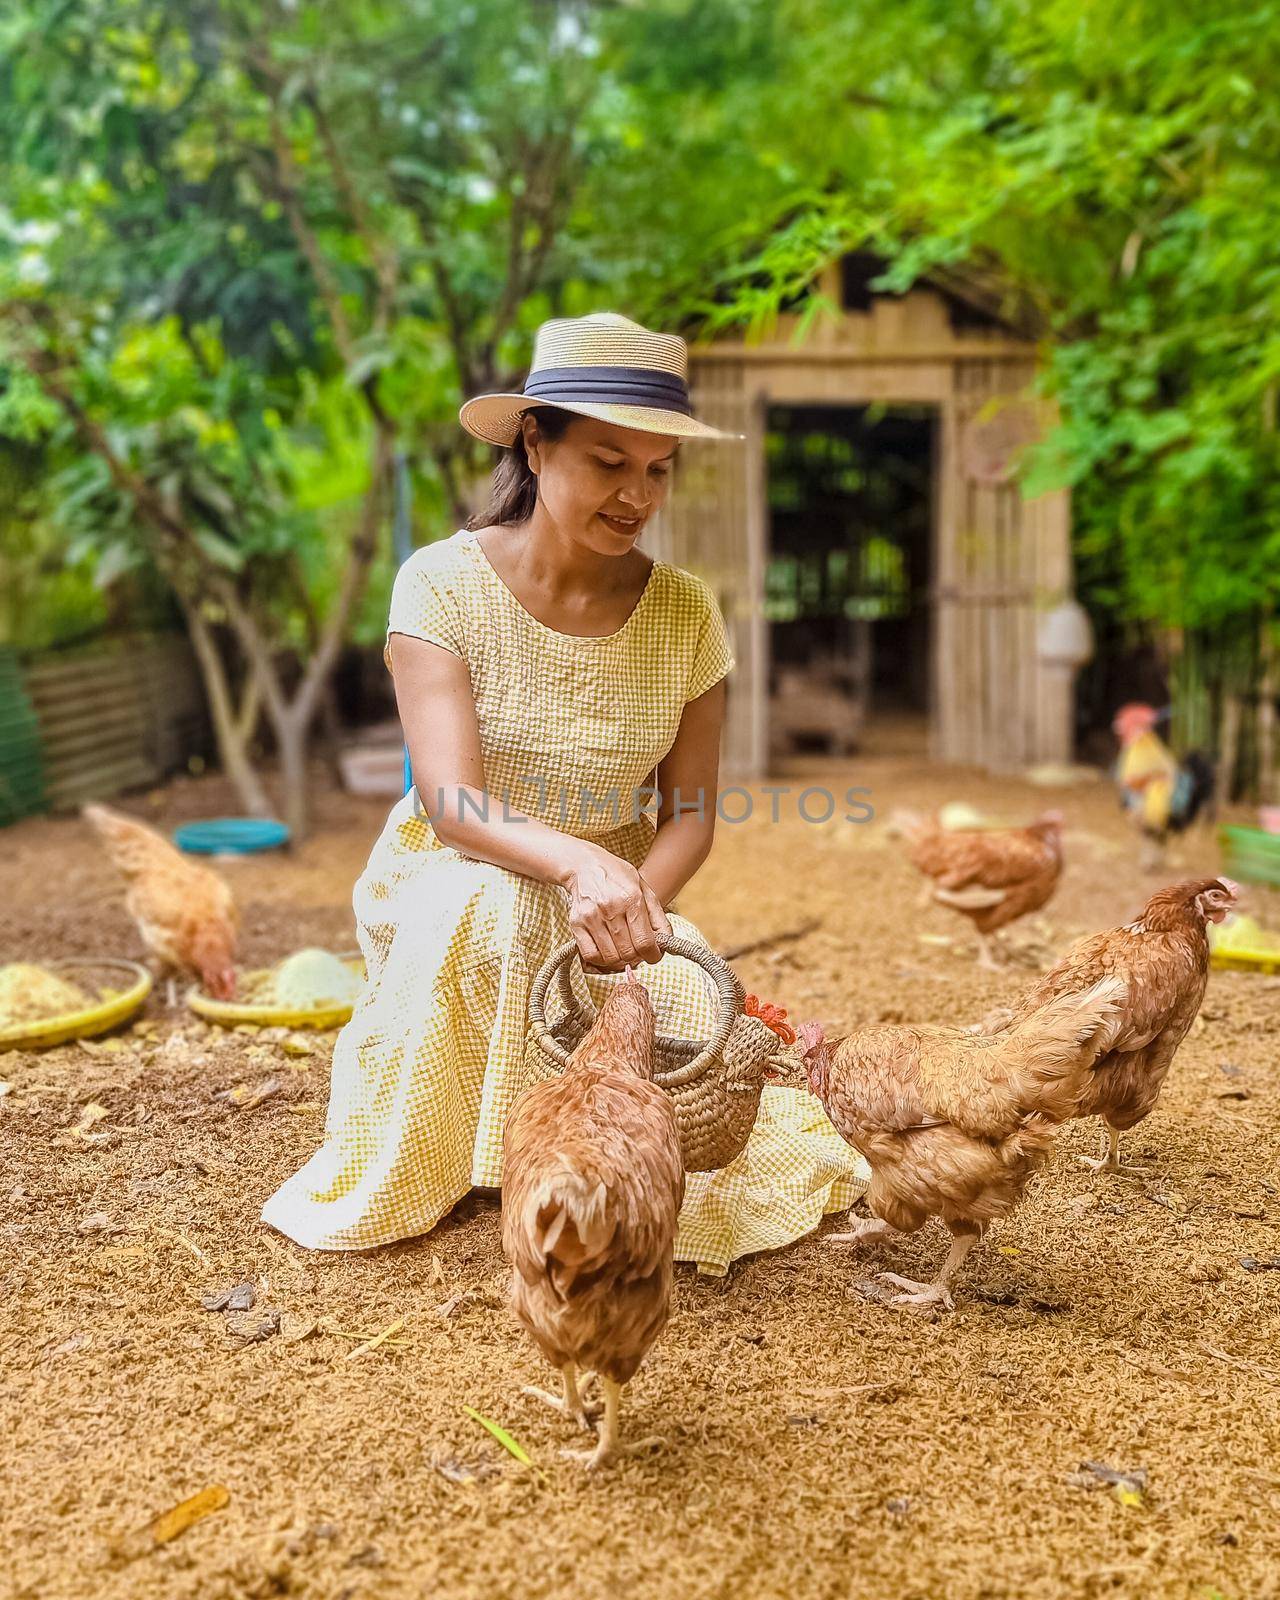 Eco farm homestay with a rice field in central Thailand, paddy field of rice during rain monsoon season in Thailand. Asian woman at a homestay farm in Thailand feeding chicken